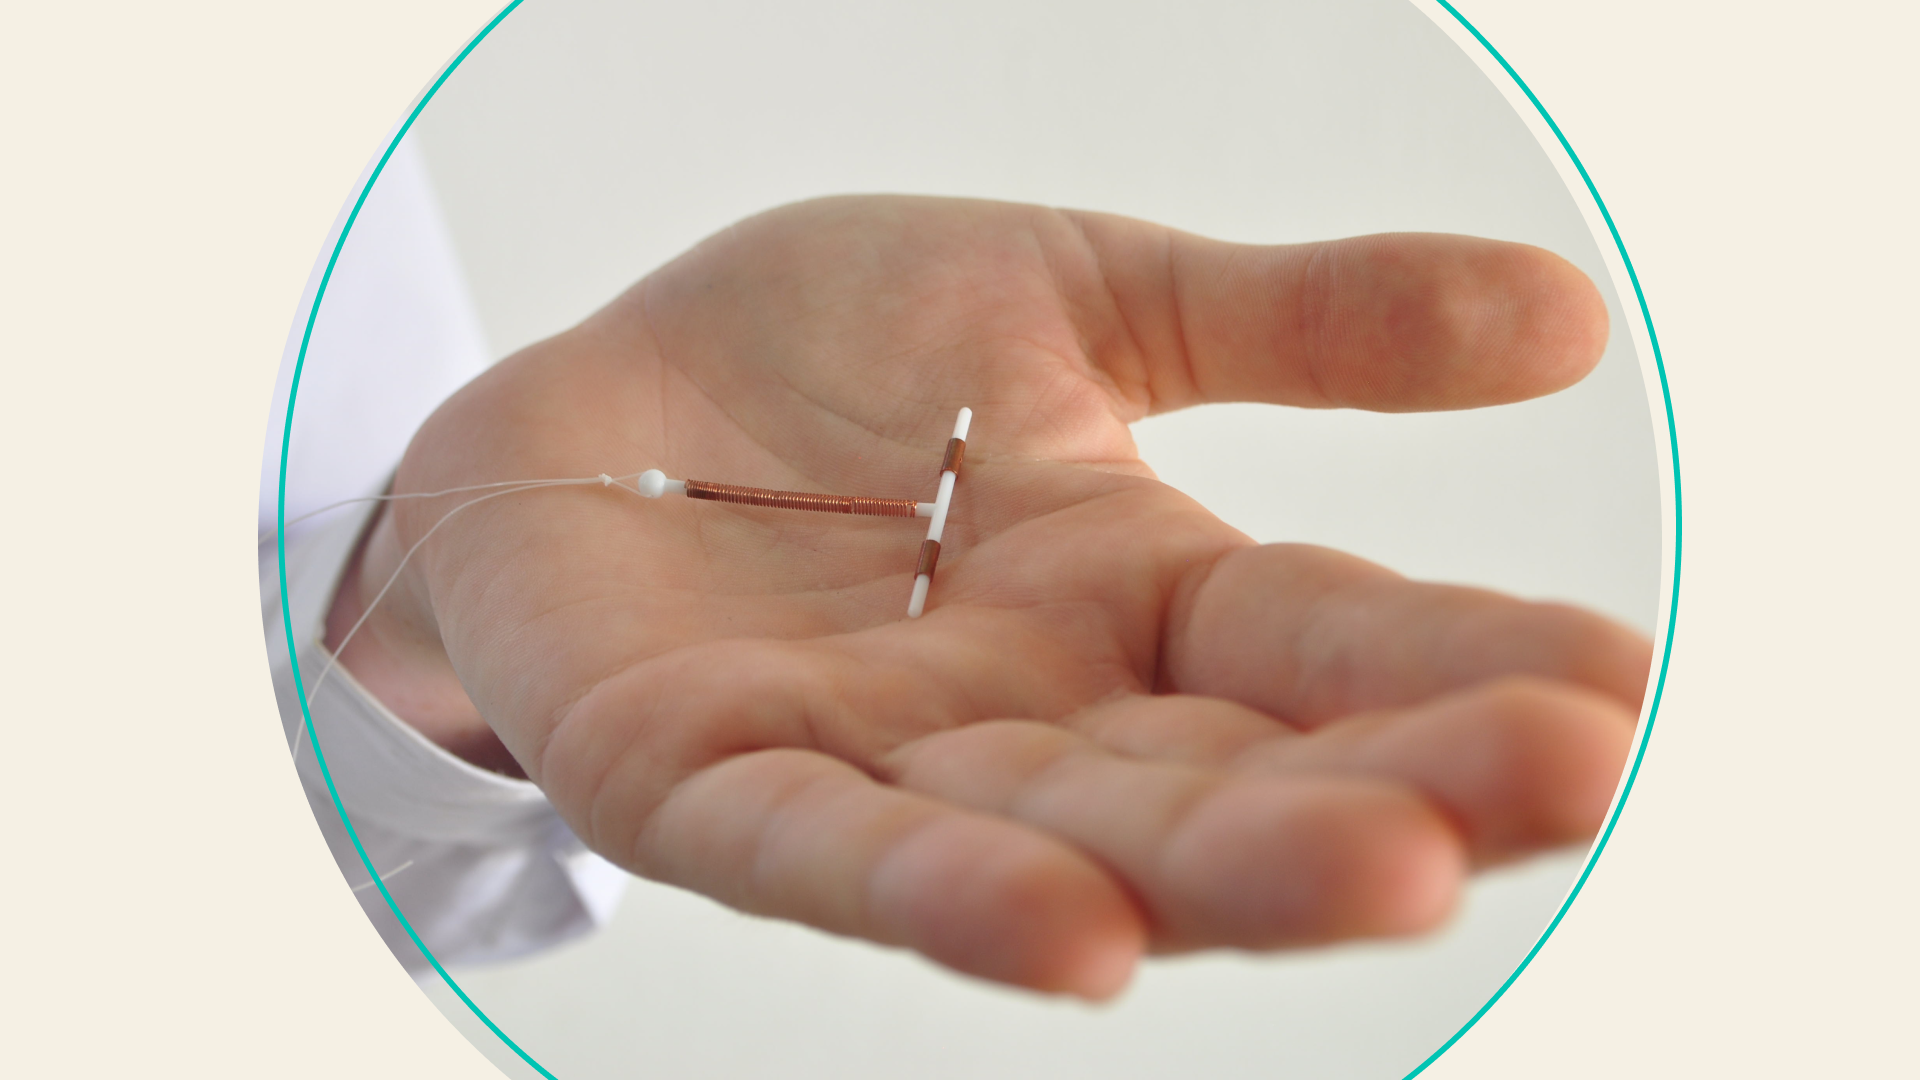 A doctor holding a copper IUD in their palm